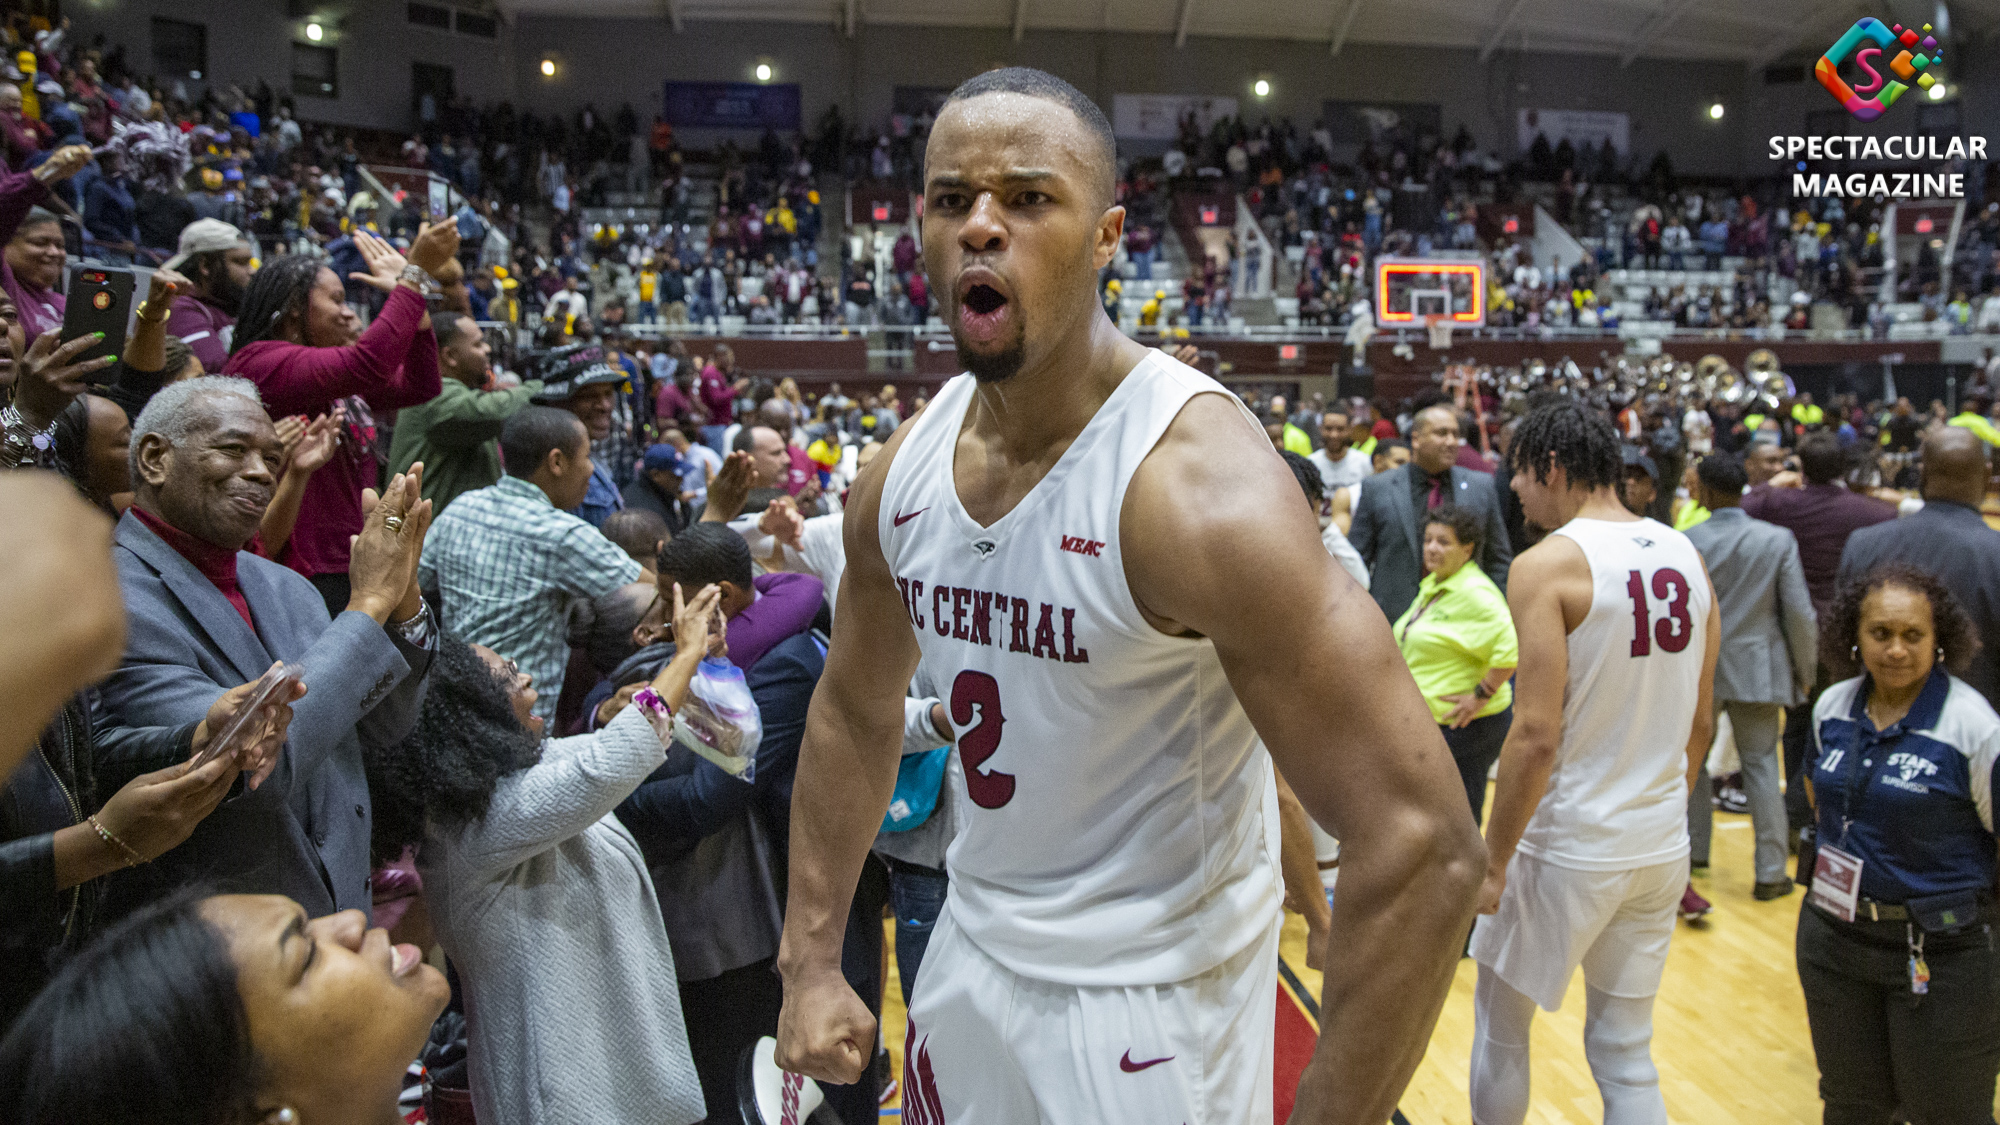 NCCU forward Jibri Blount celebrates with crowd after defeating N.C. A&T 86-80 in the MEAC Regular-Season Championship game at McDougald-McLendon Arena in Durham, N.C., Thursday, Mar. 6, 2020.